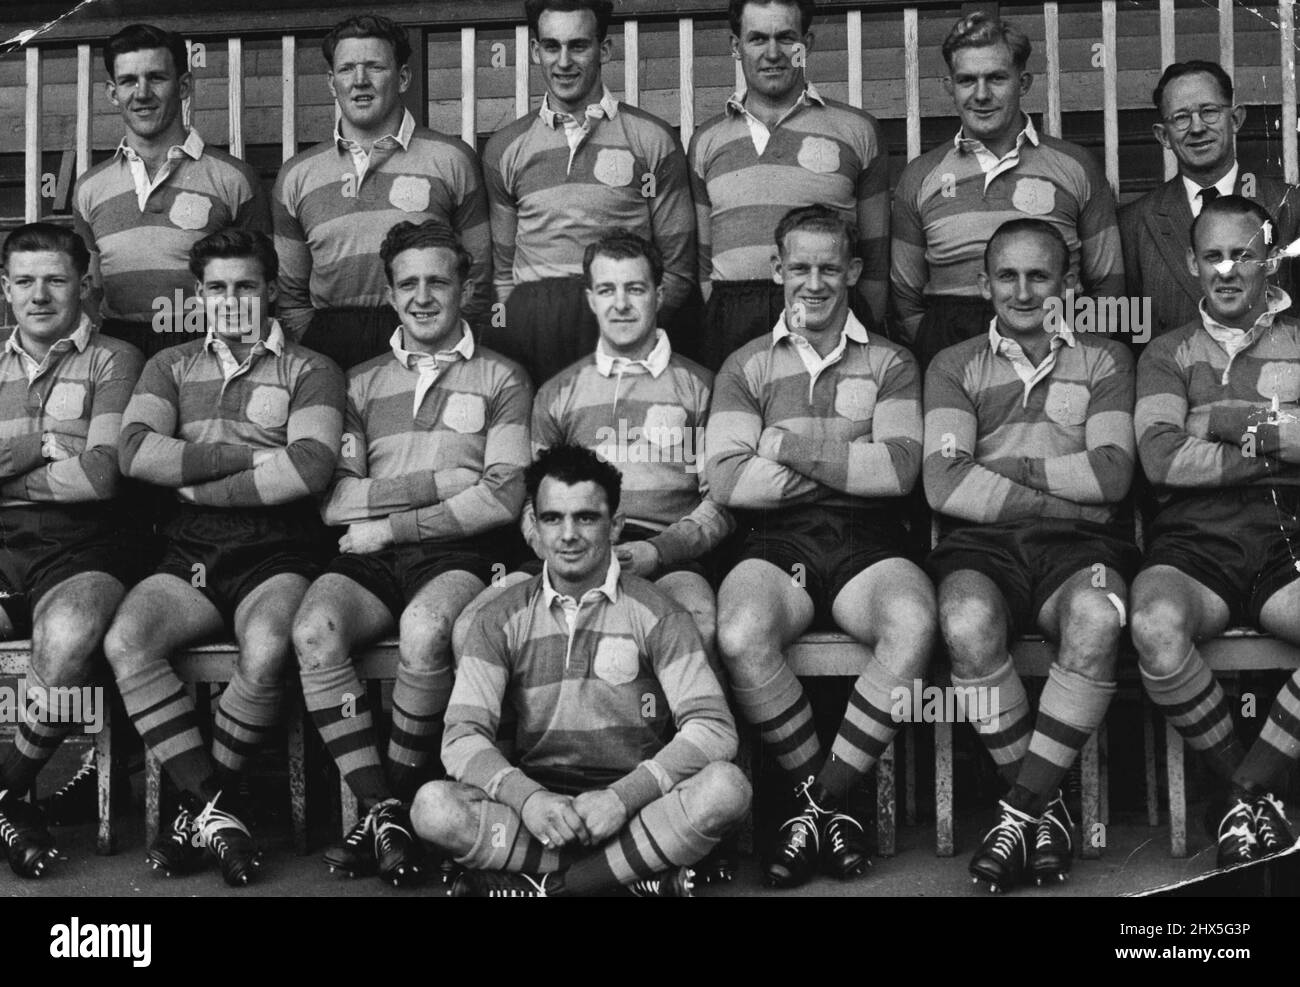 Rugby League - City Teams All Years To 1969 - Foot Ball. June 07, 1949. Stock Photo